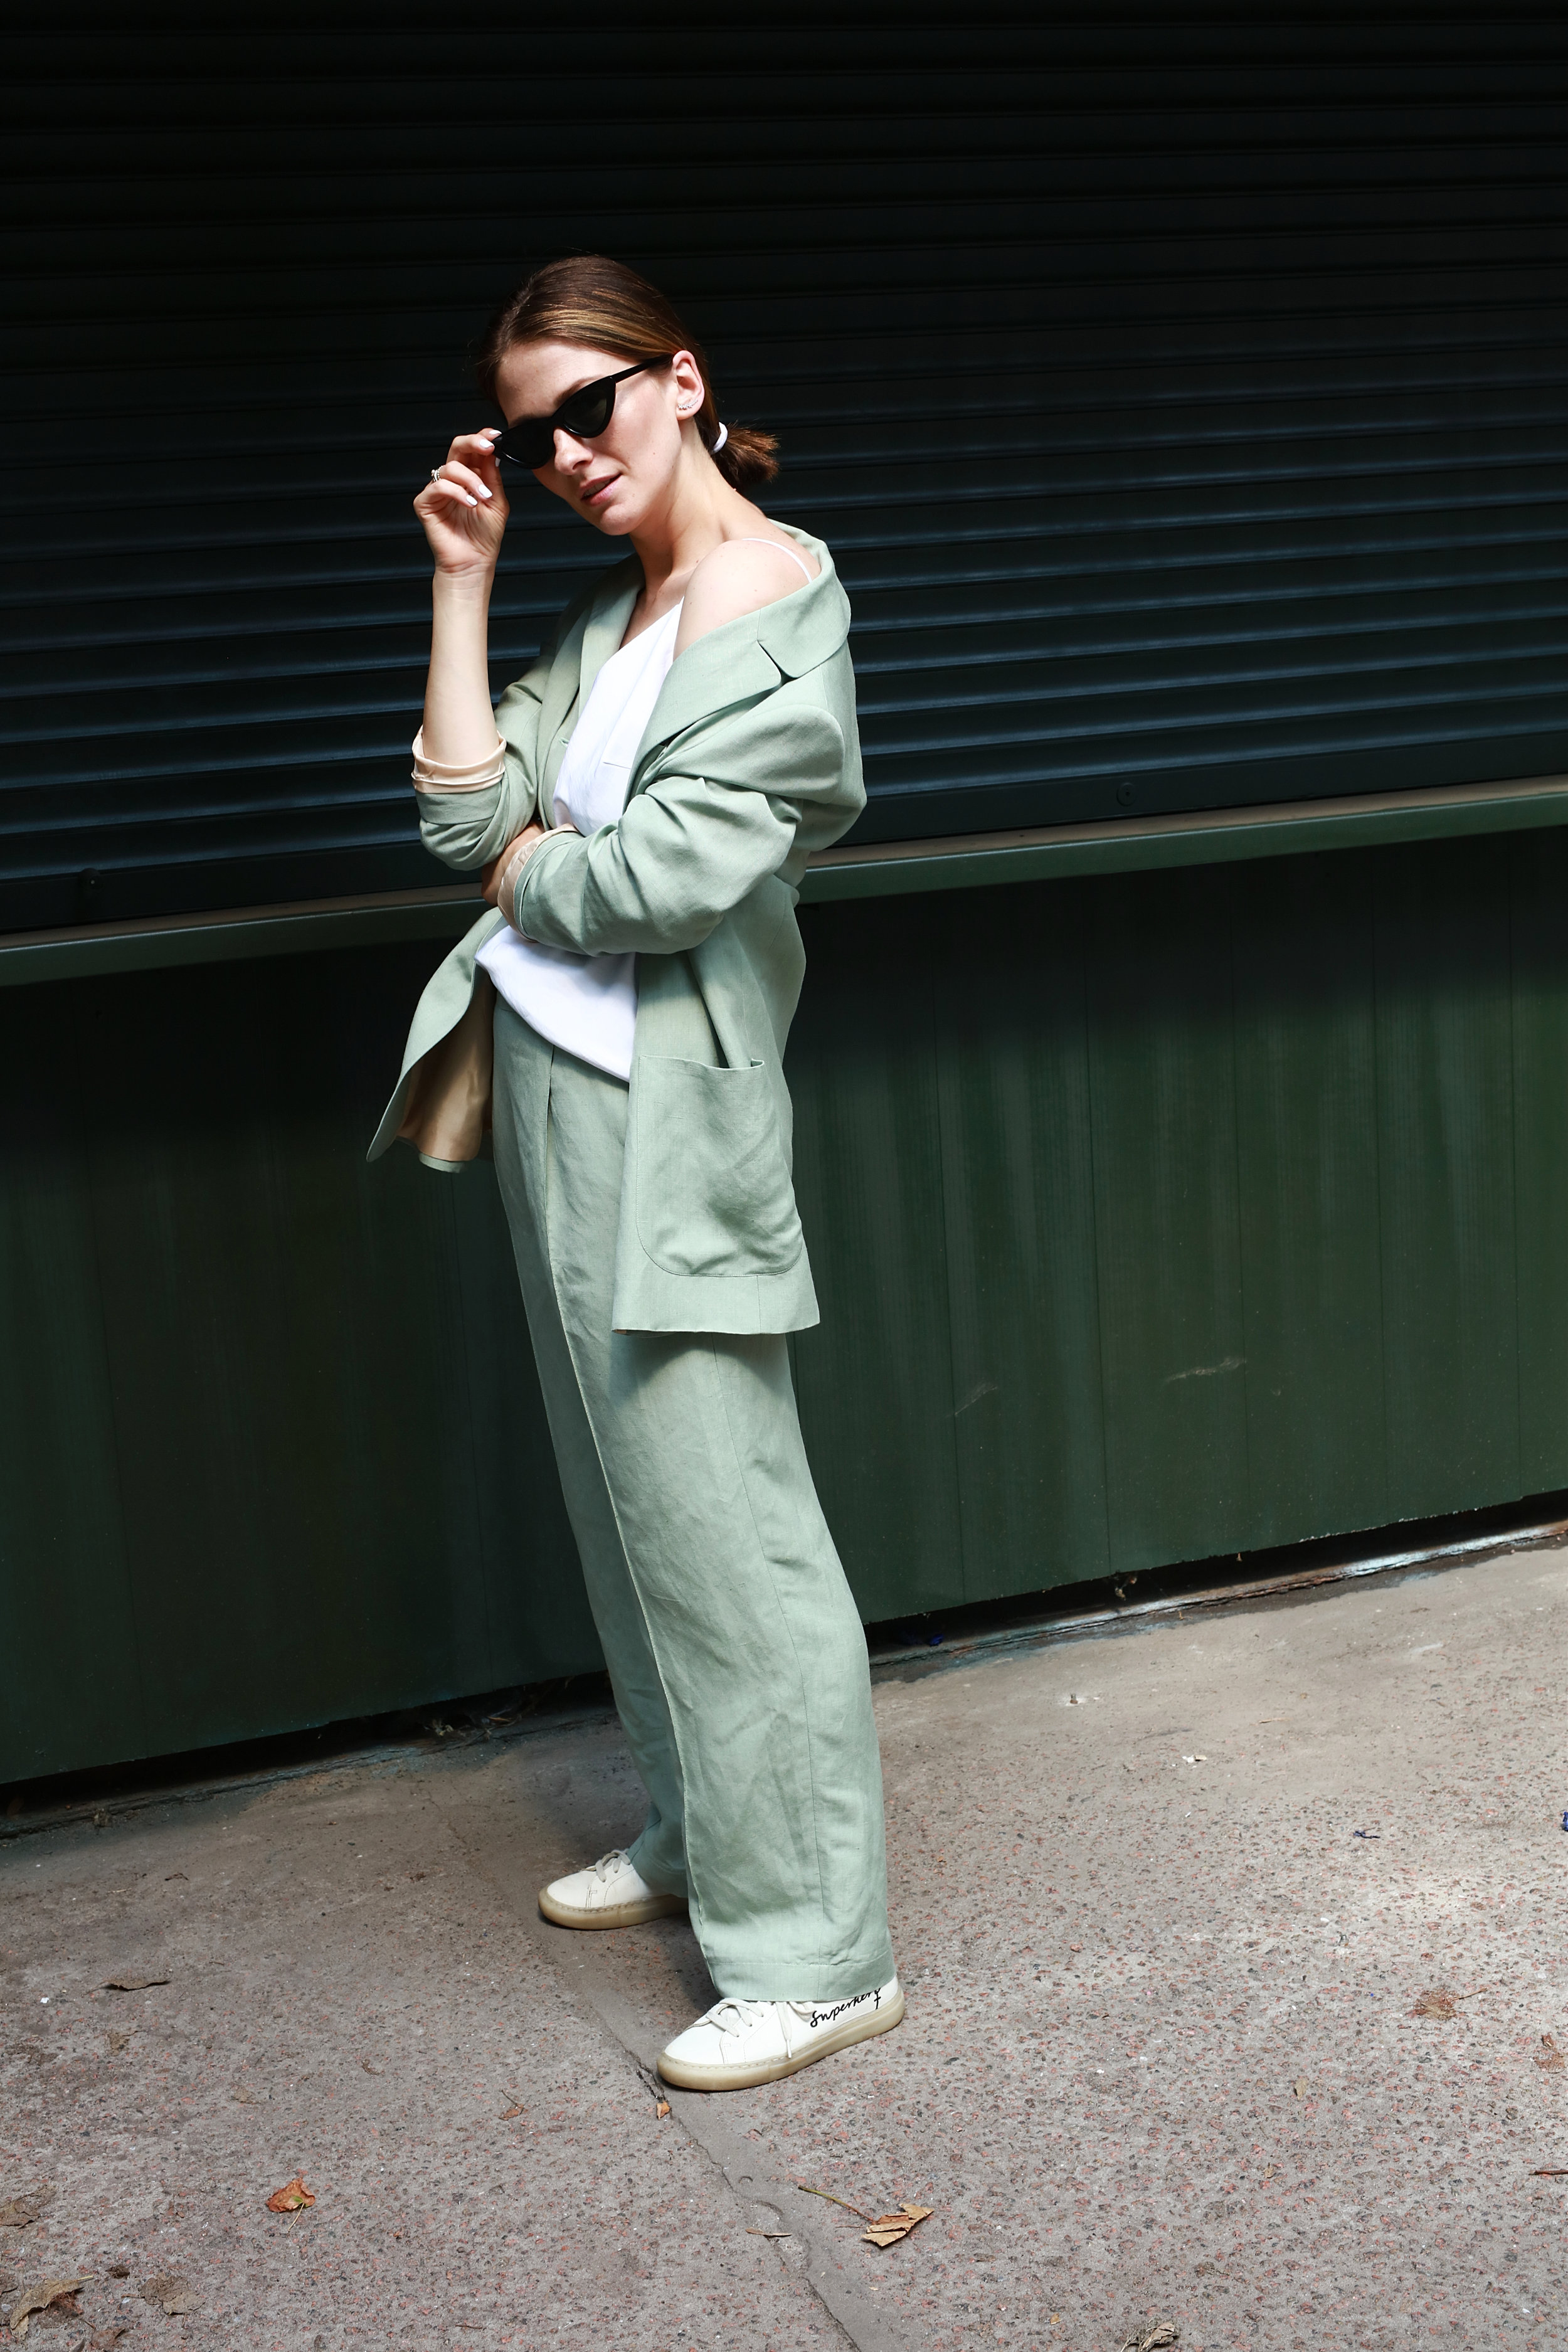 http___ann-a-porter.com_linen-jacket-and-trousers-katimo-1